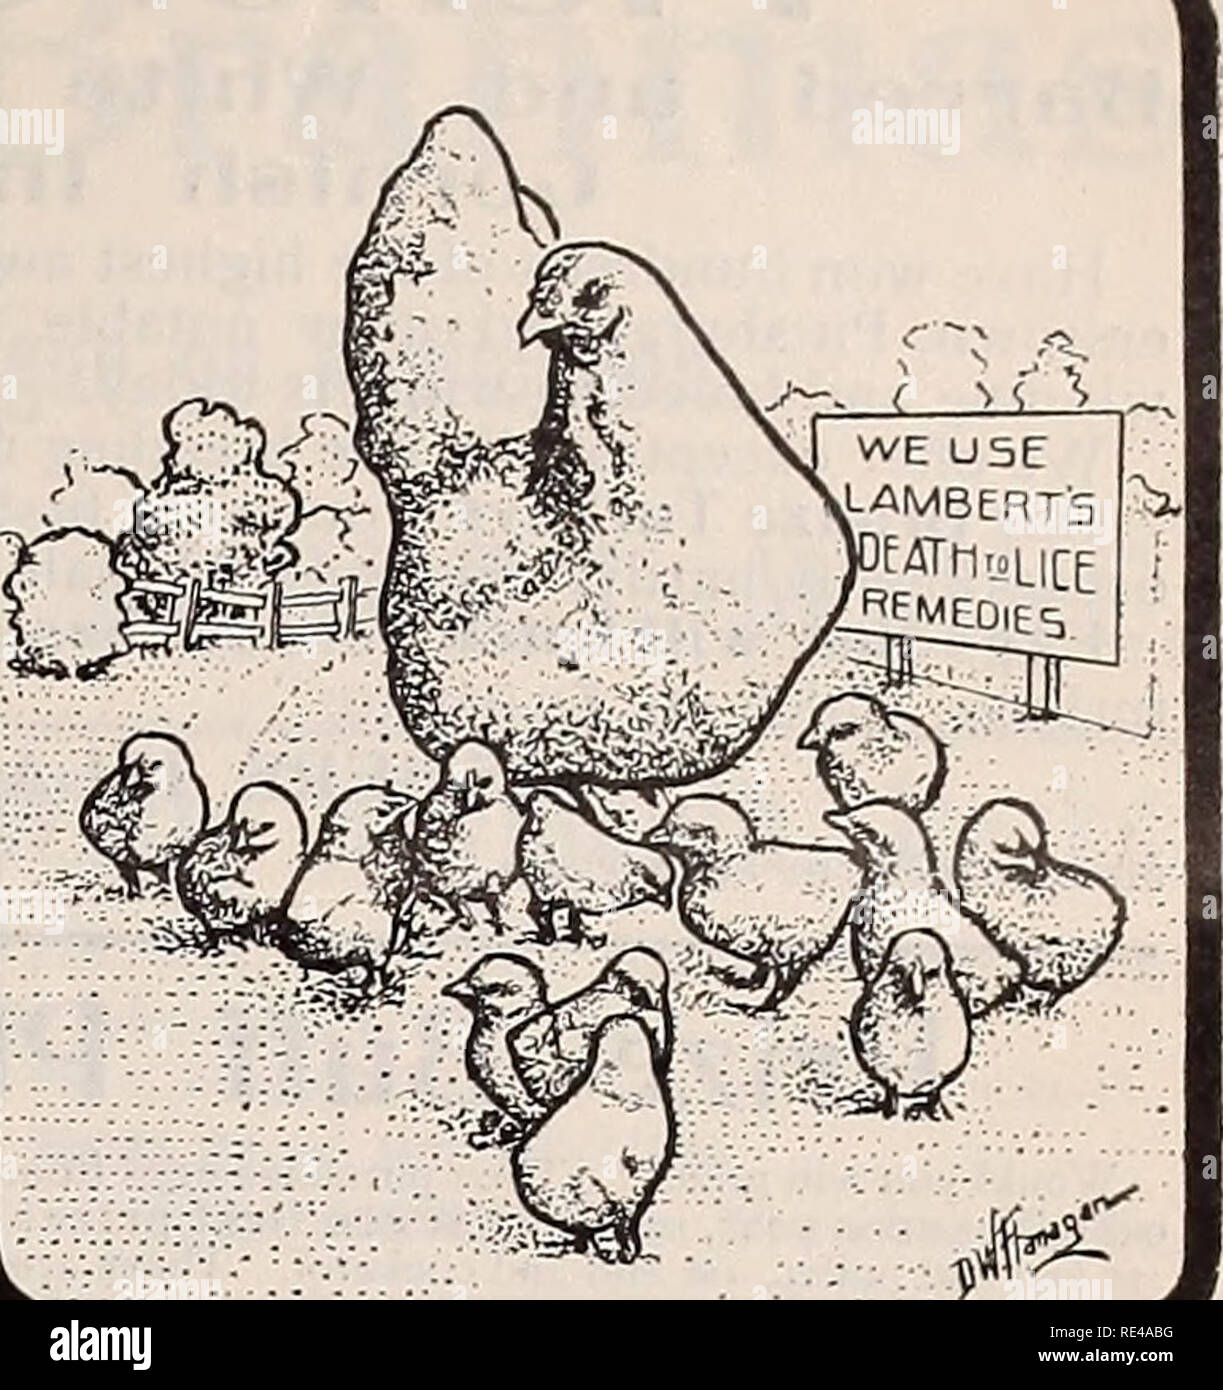 . The Eastern poultryman. Poultry Periodicals; Fruit Periodicals. A GOOD HATCH of stron;; healthy chickens is not the result of luck or chance. The best hatches are secured by those who use LAMBERT'S DEATH TO LICE on their breeders to preserve their health and vigor, and on their sitters to keep them clean and com- fortable. It injures nothing but vermin. Trial size, enough for ten applications, loc postpaid. A 48 o7,., 50c, or a 100 oz., -Si, from here or nearest agency by express. Book free. D. J. LAMBERT. BOX 345. APRON AUG. R. I.. COCHINS. BUFF COCHINS. Spancrler Bros, will sell eggs from  Stock Photo